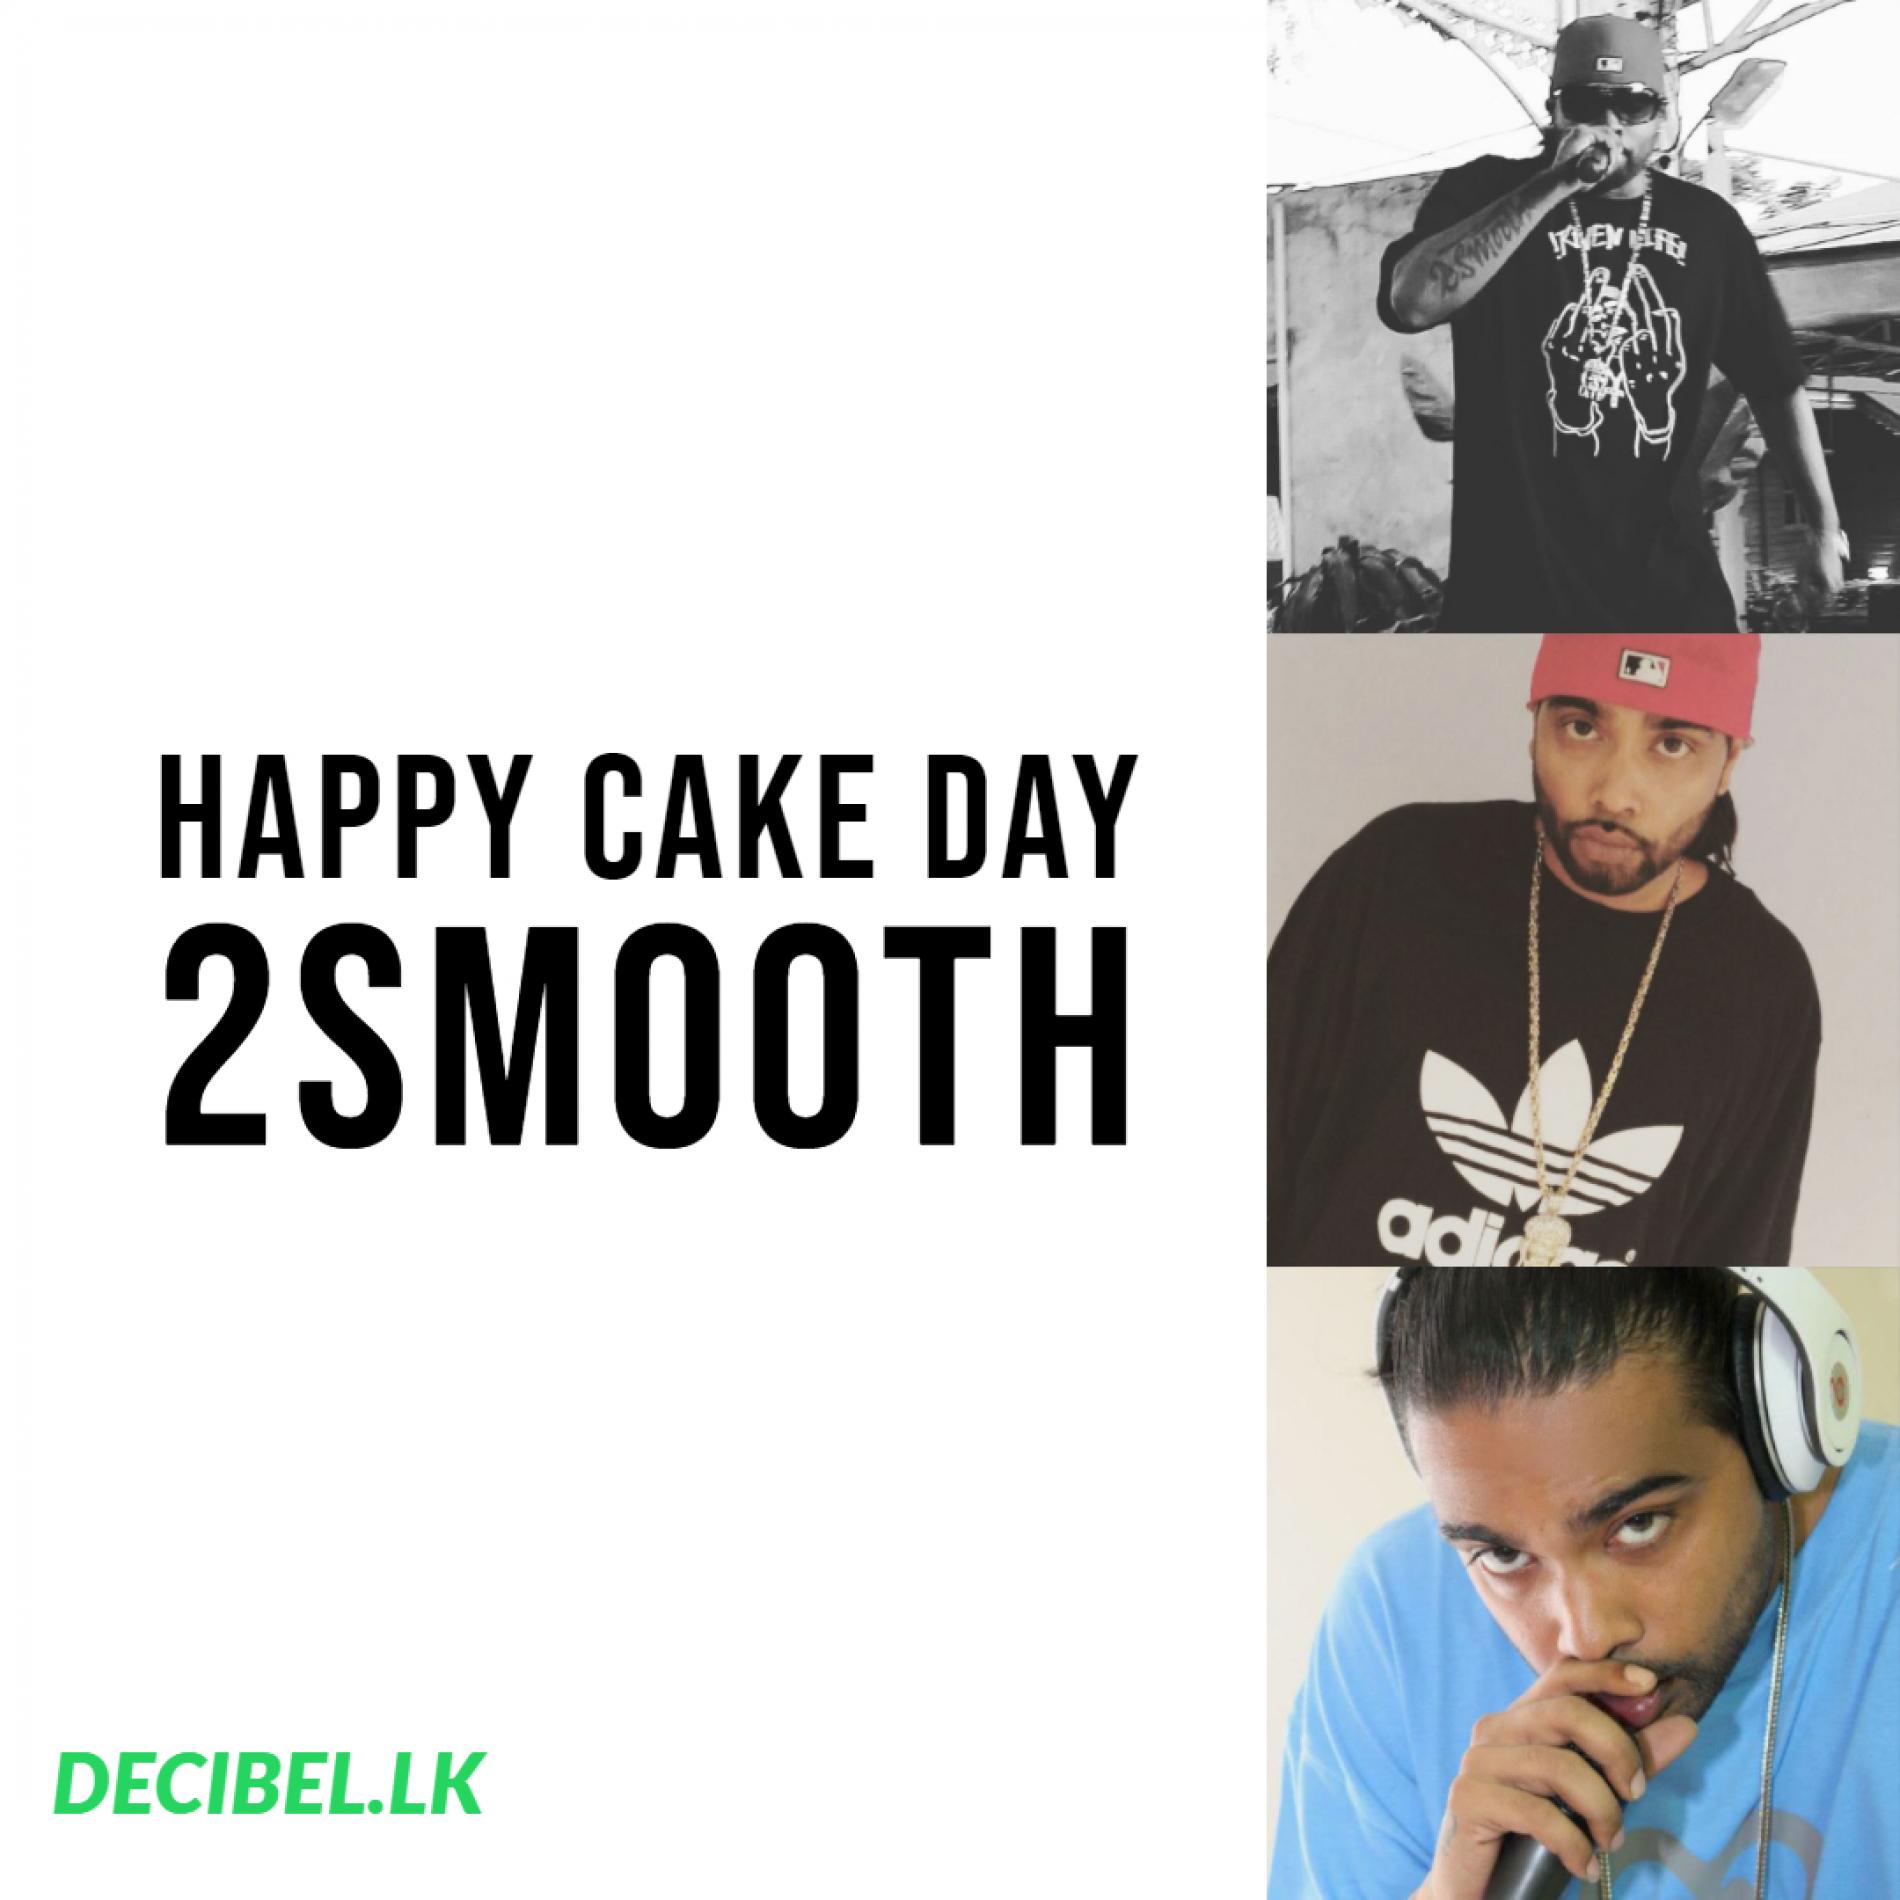 Happy Cake Day 2Smooth!